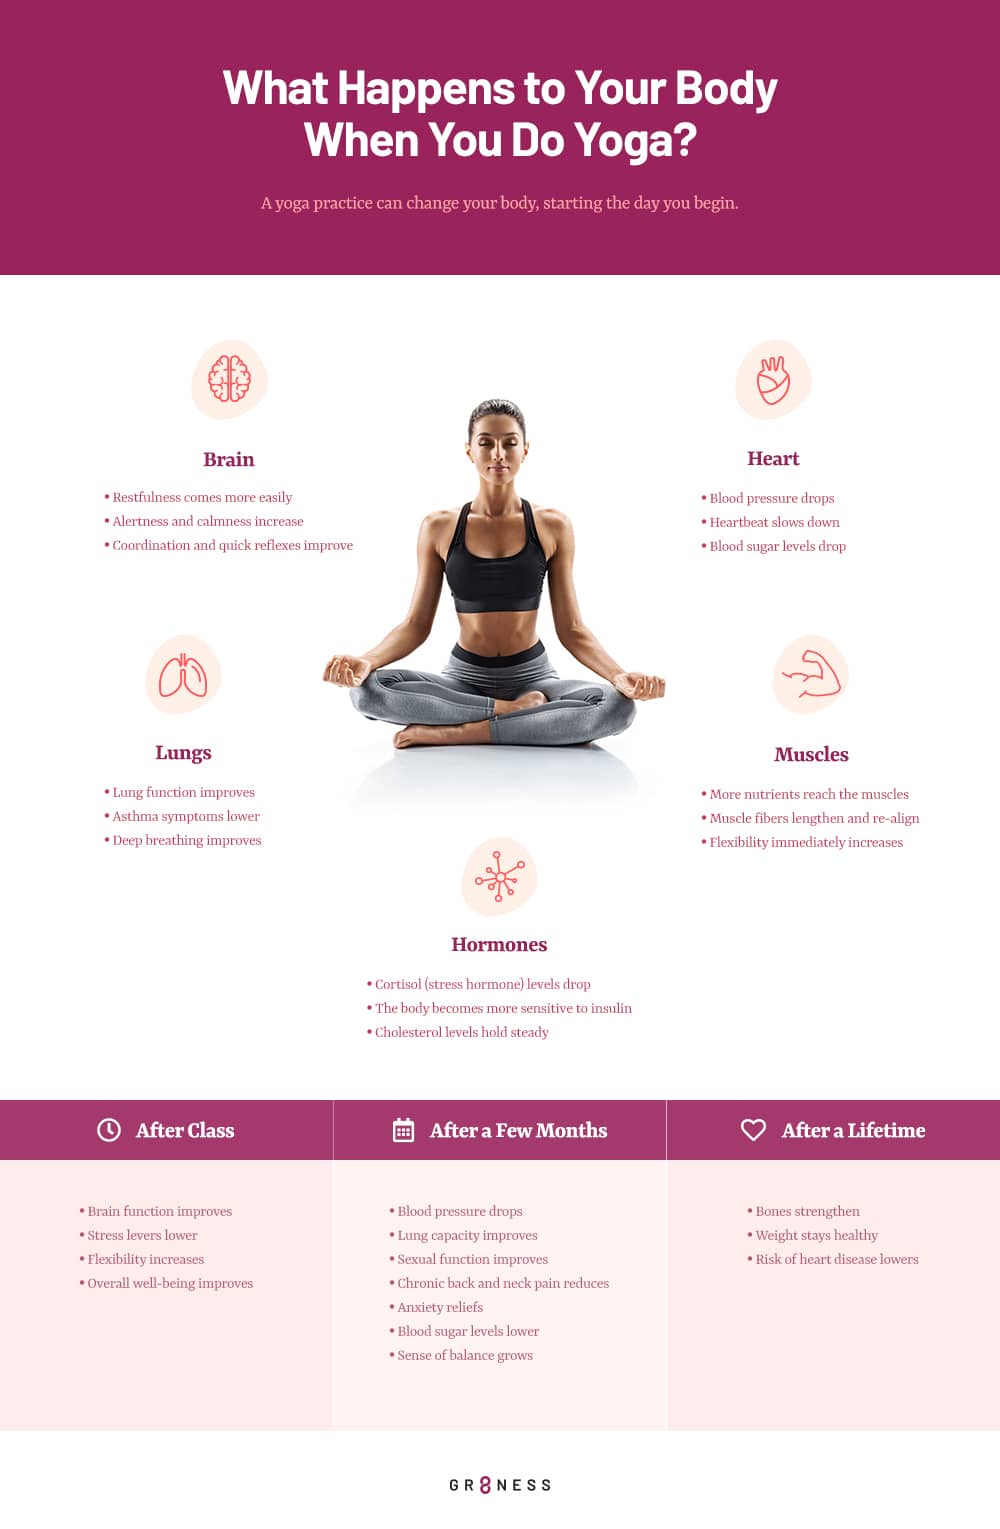 A step by step guide detailing what happens to your body when doing yoga